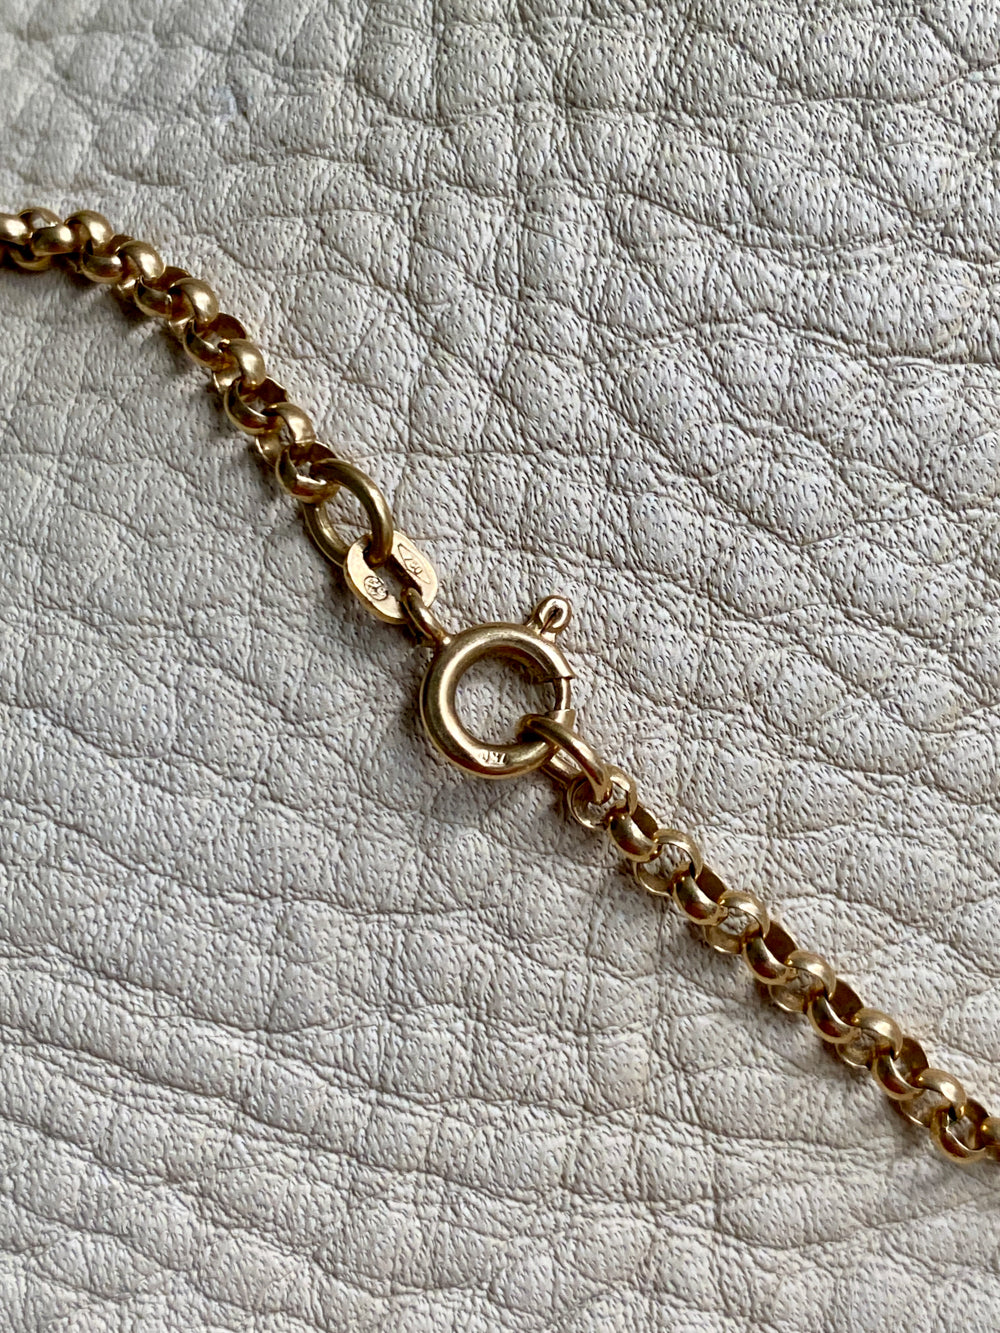 18k gold pea link necklace by Balestra - Vintage Italian - 23.75 inch length